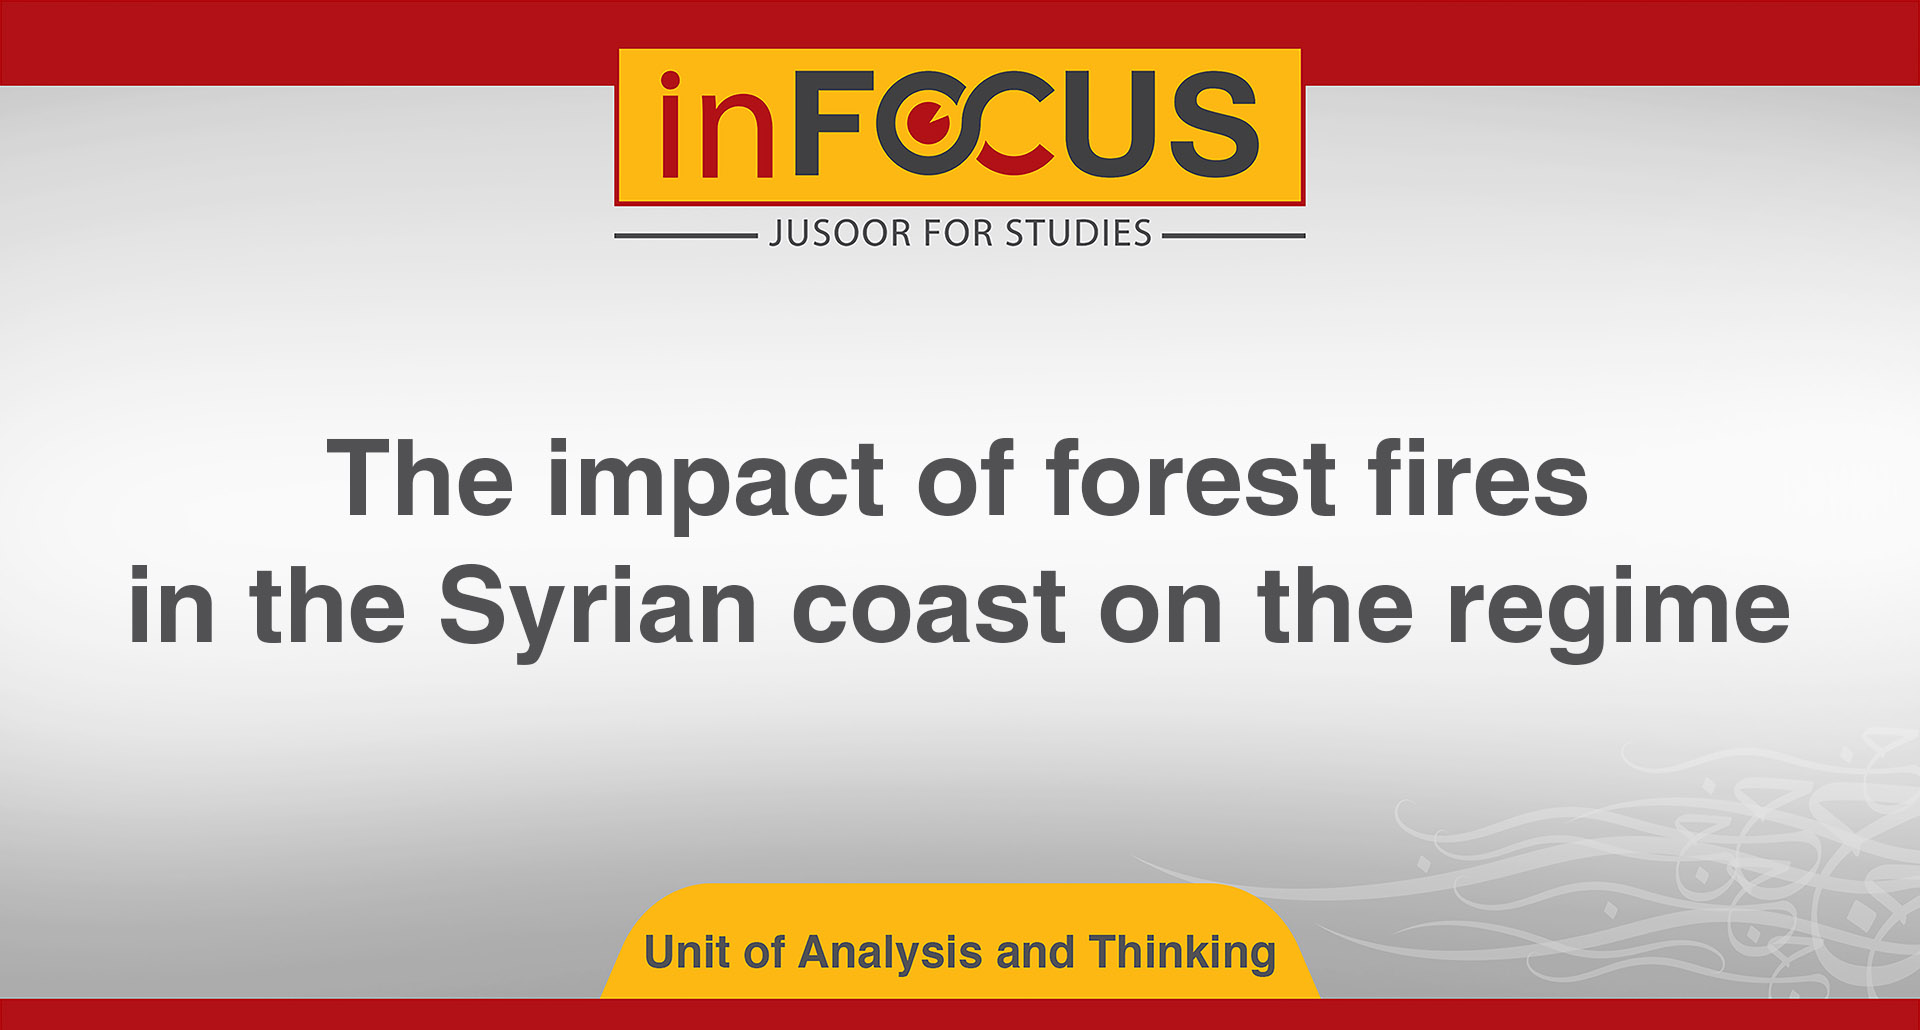 The impact of forest fires in the Syrian coast on the regime